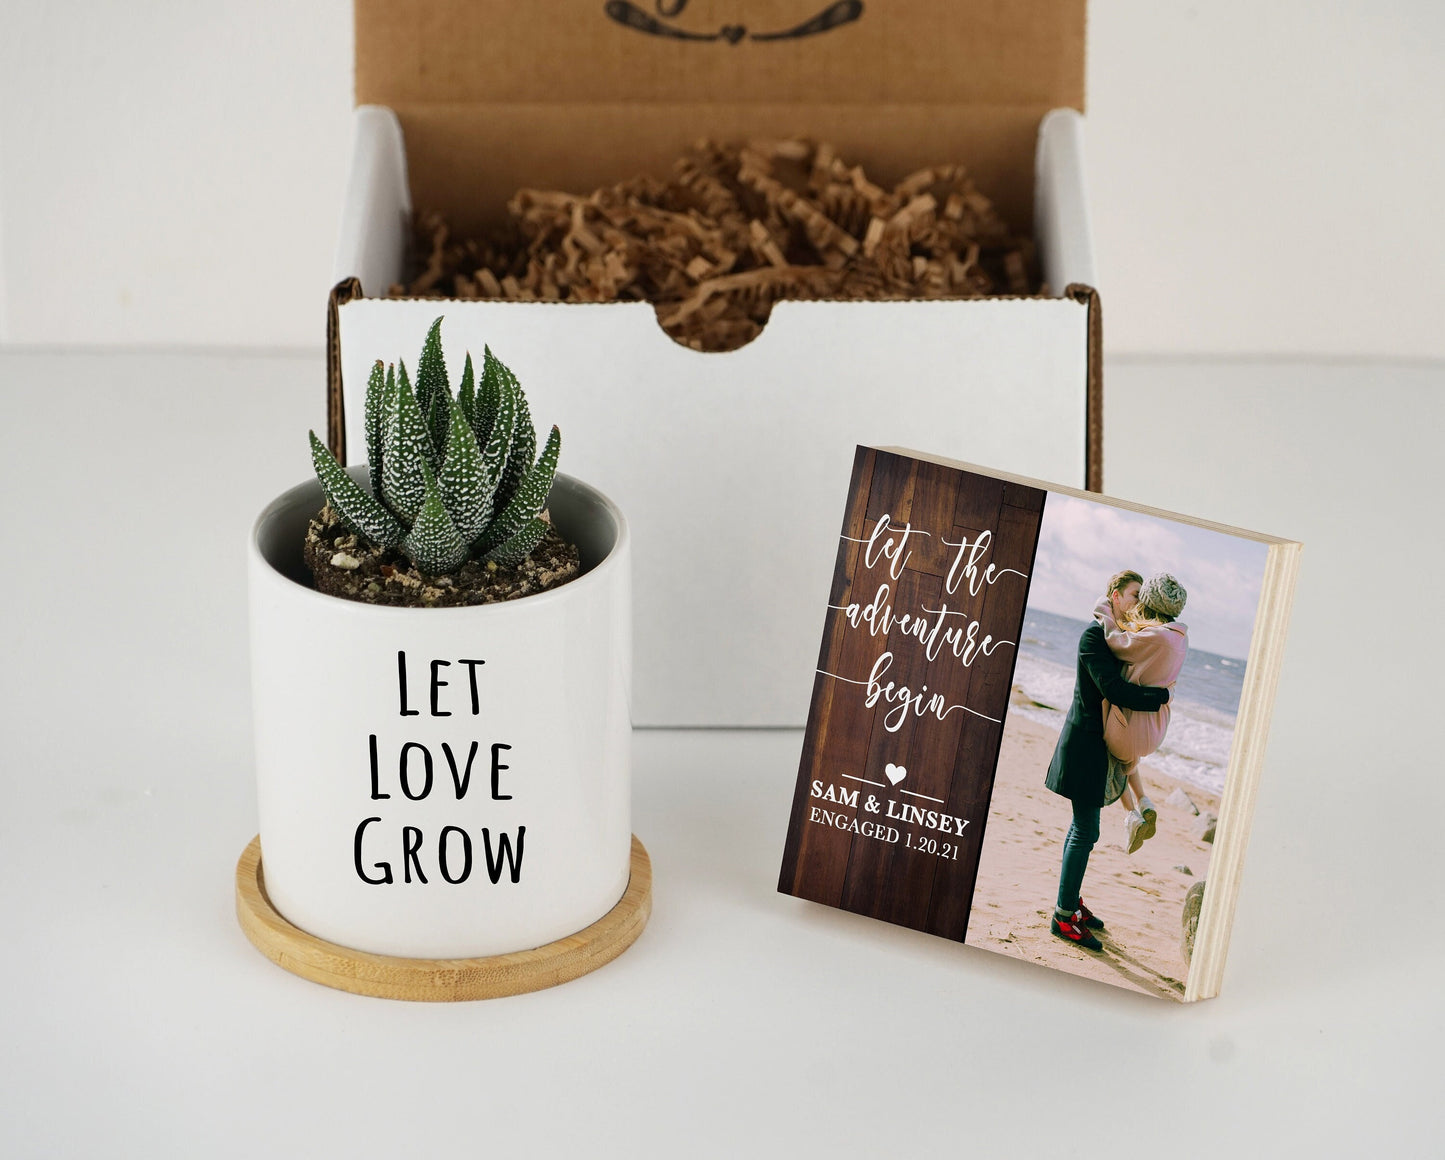 Personalized Engagement Gift - Photo Block + Planter - Custom Engagement Gift Box For Couple-Gift For Engaged Friend, Gift for Newly Engaged